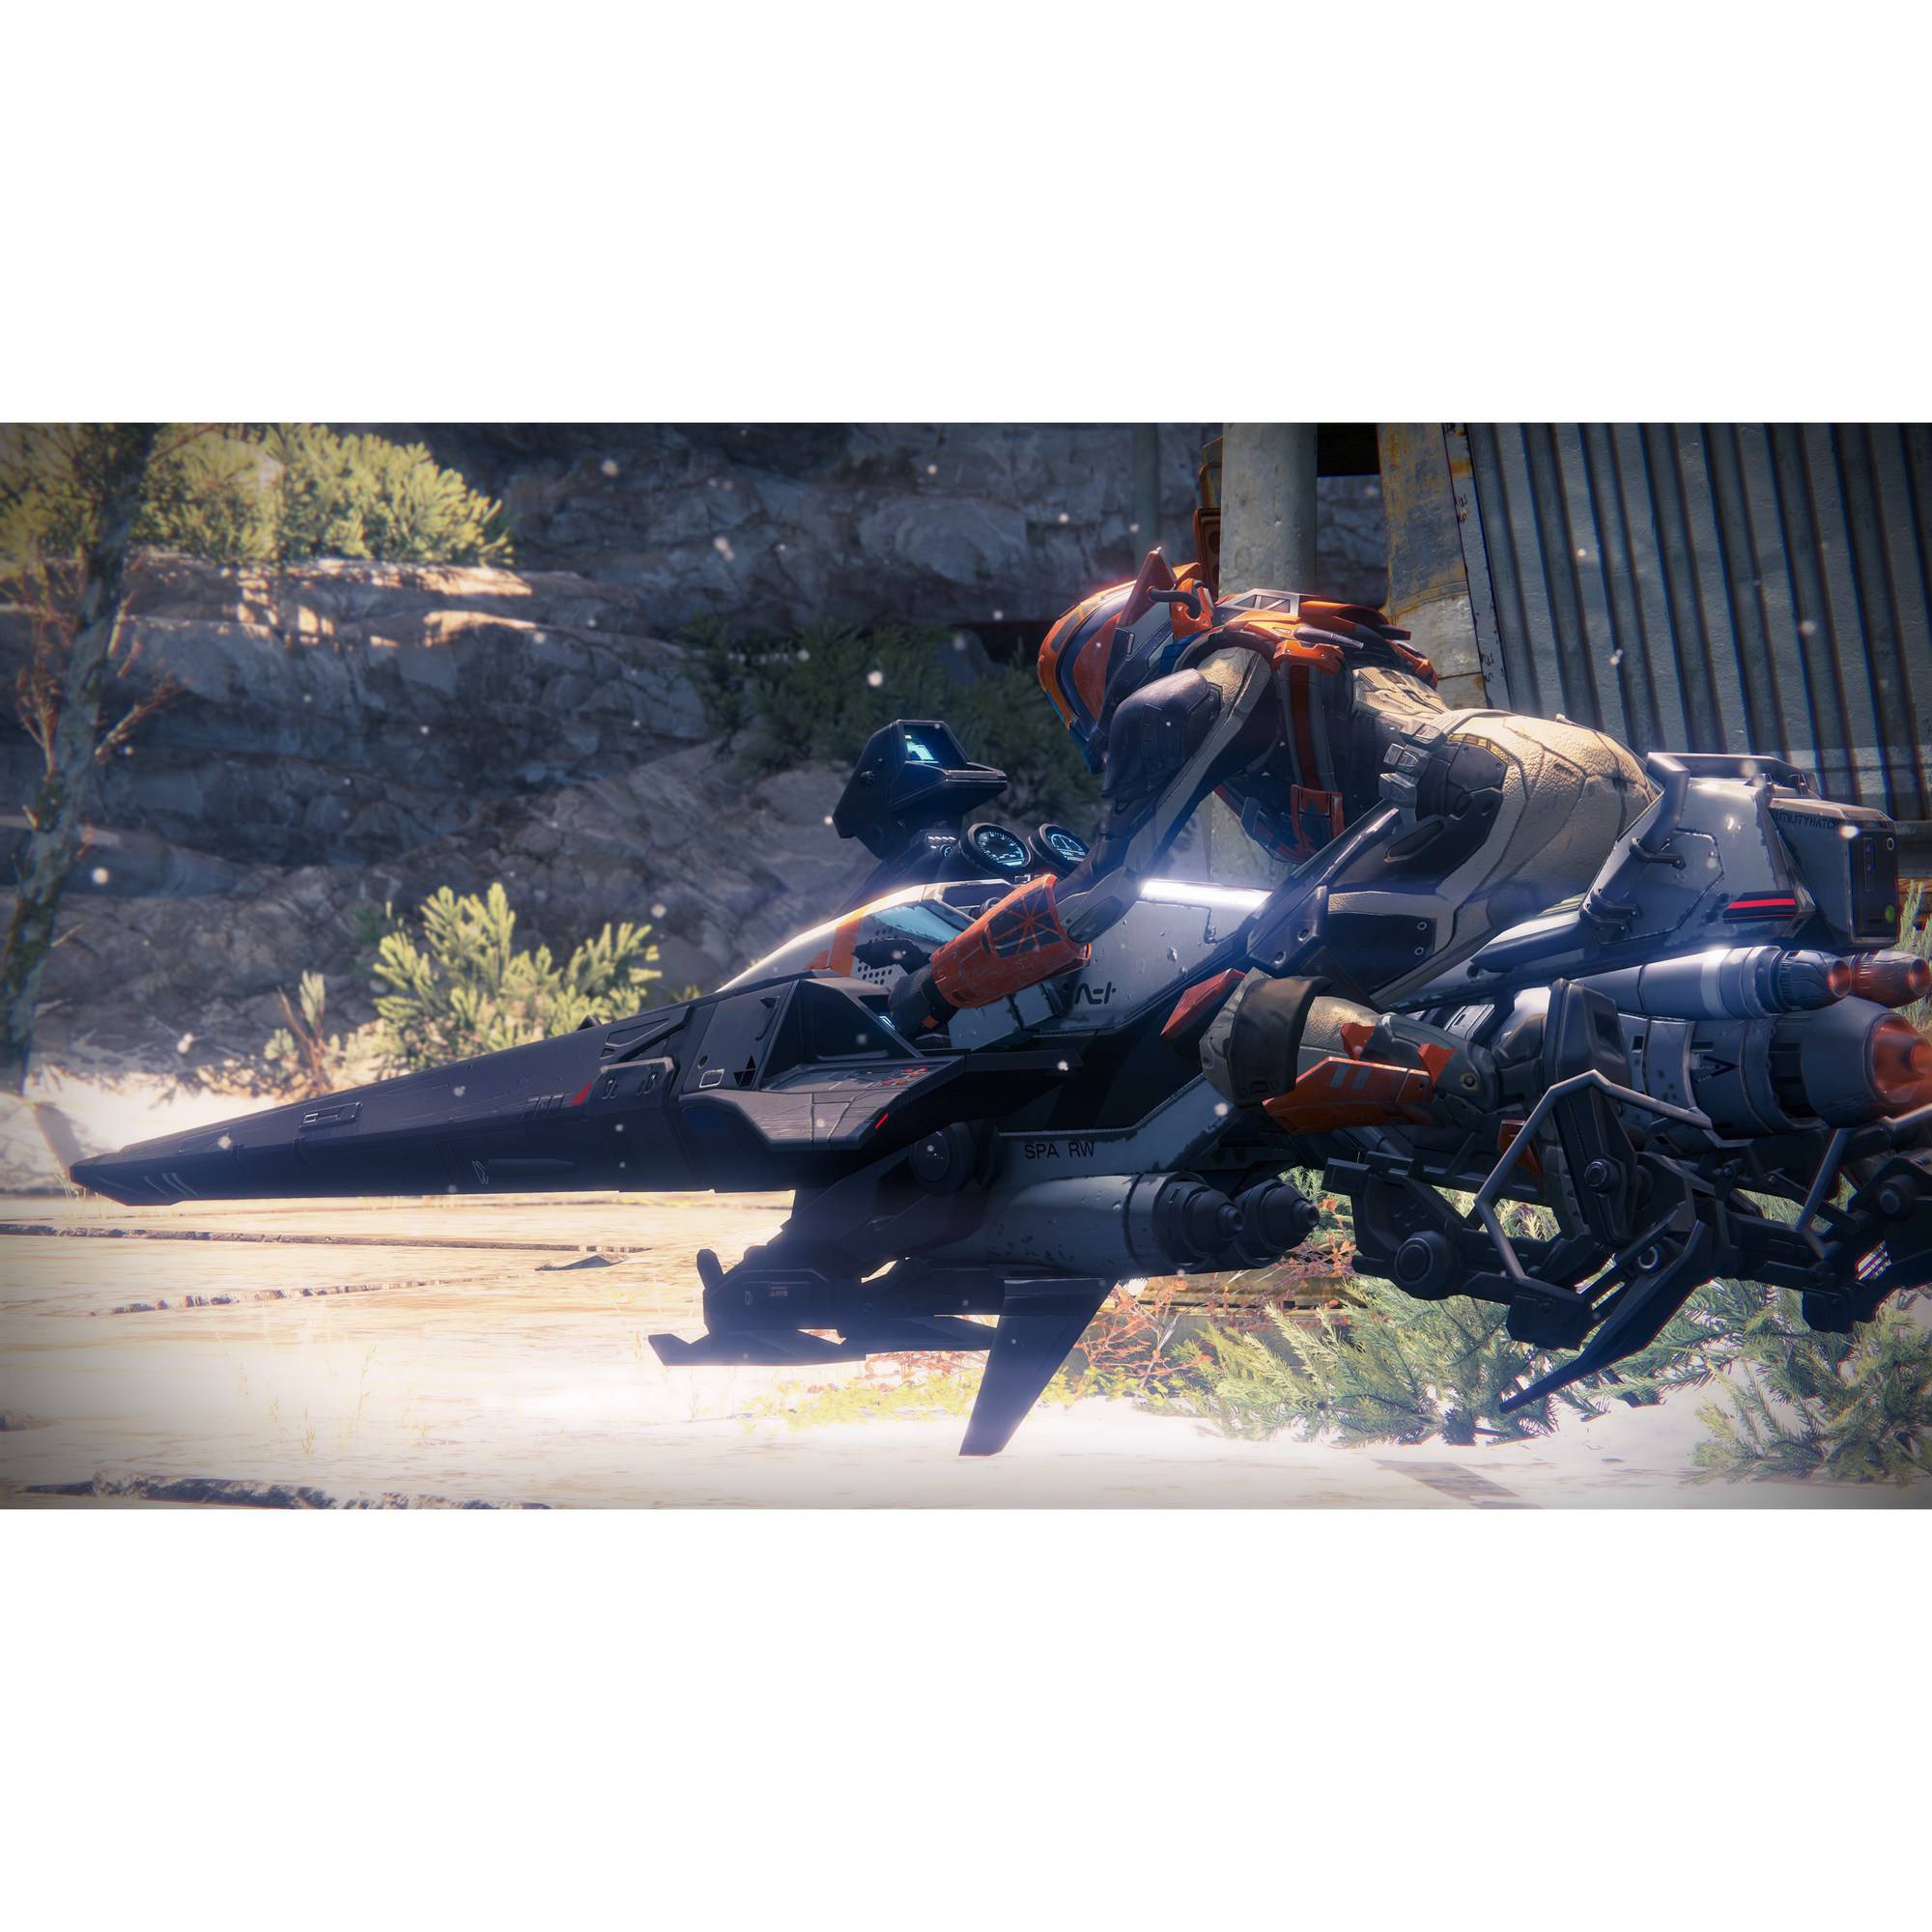 Destiny: The Taken King Legendary Edition, Activision, PlayStation 4, 047875874428 - image 16 of 31